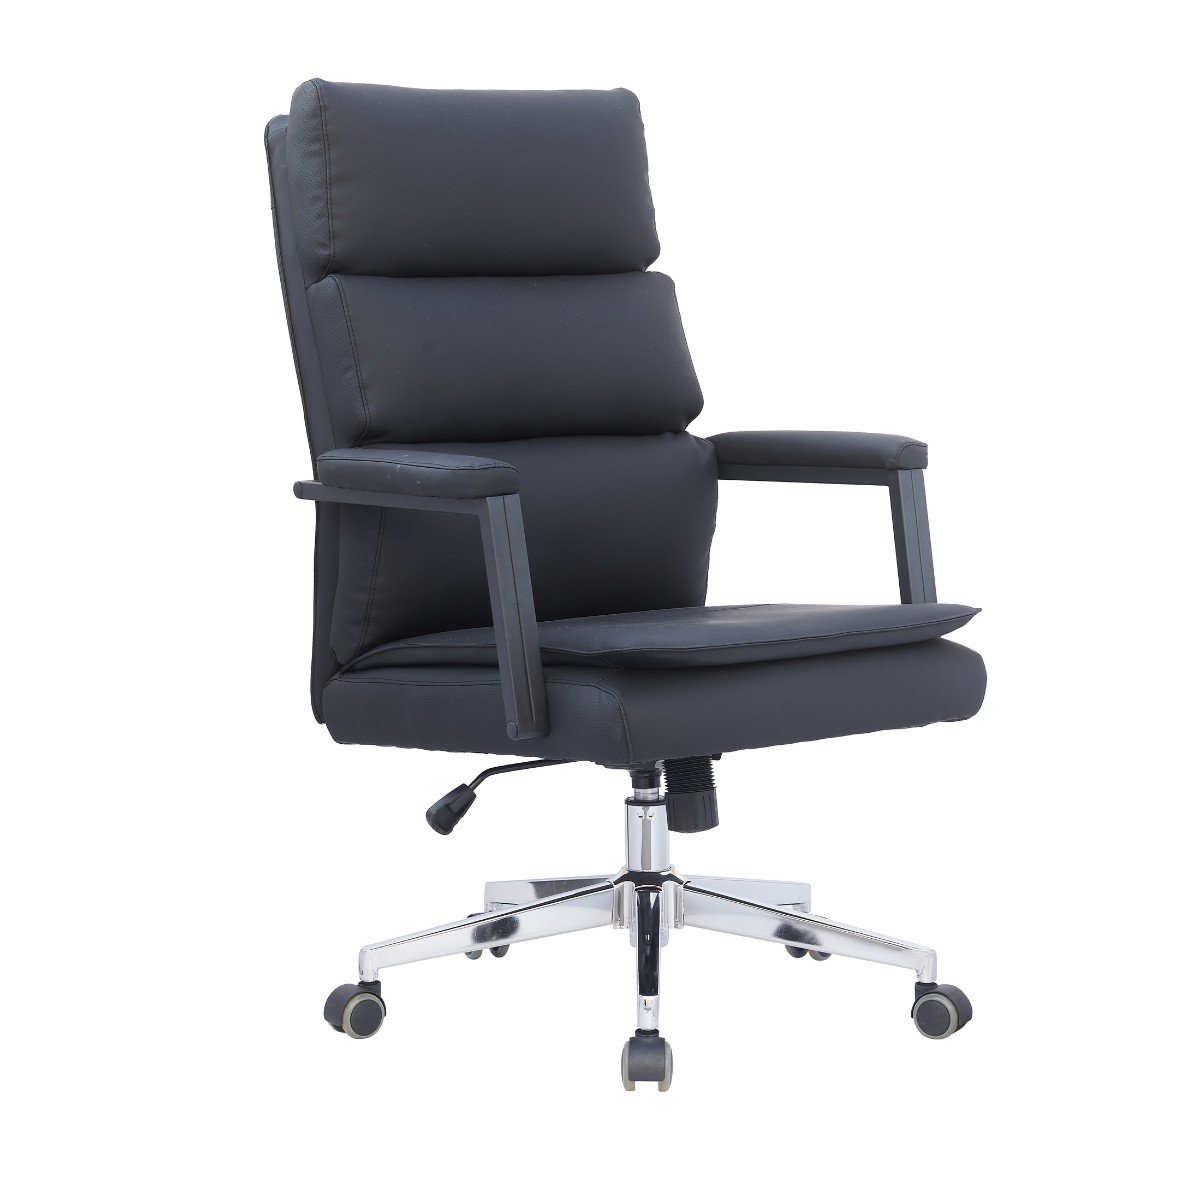 Somerset Black Executive Office Chair - 1